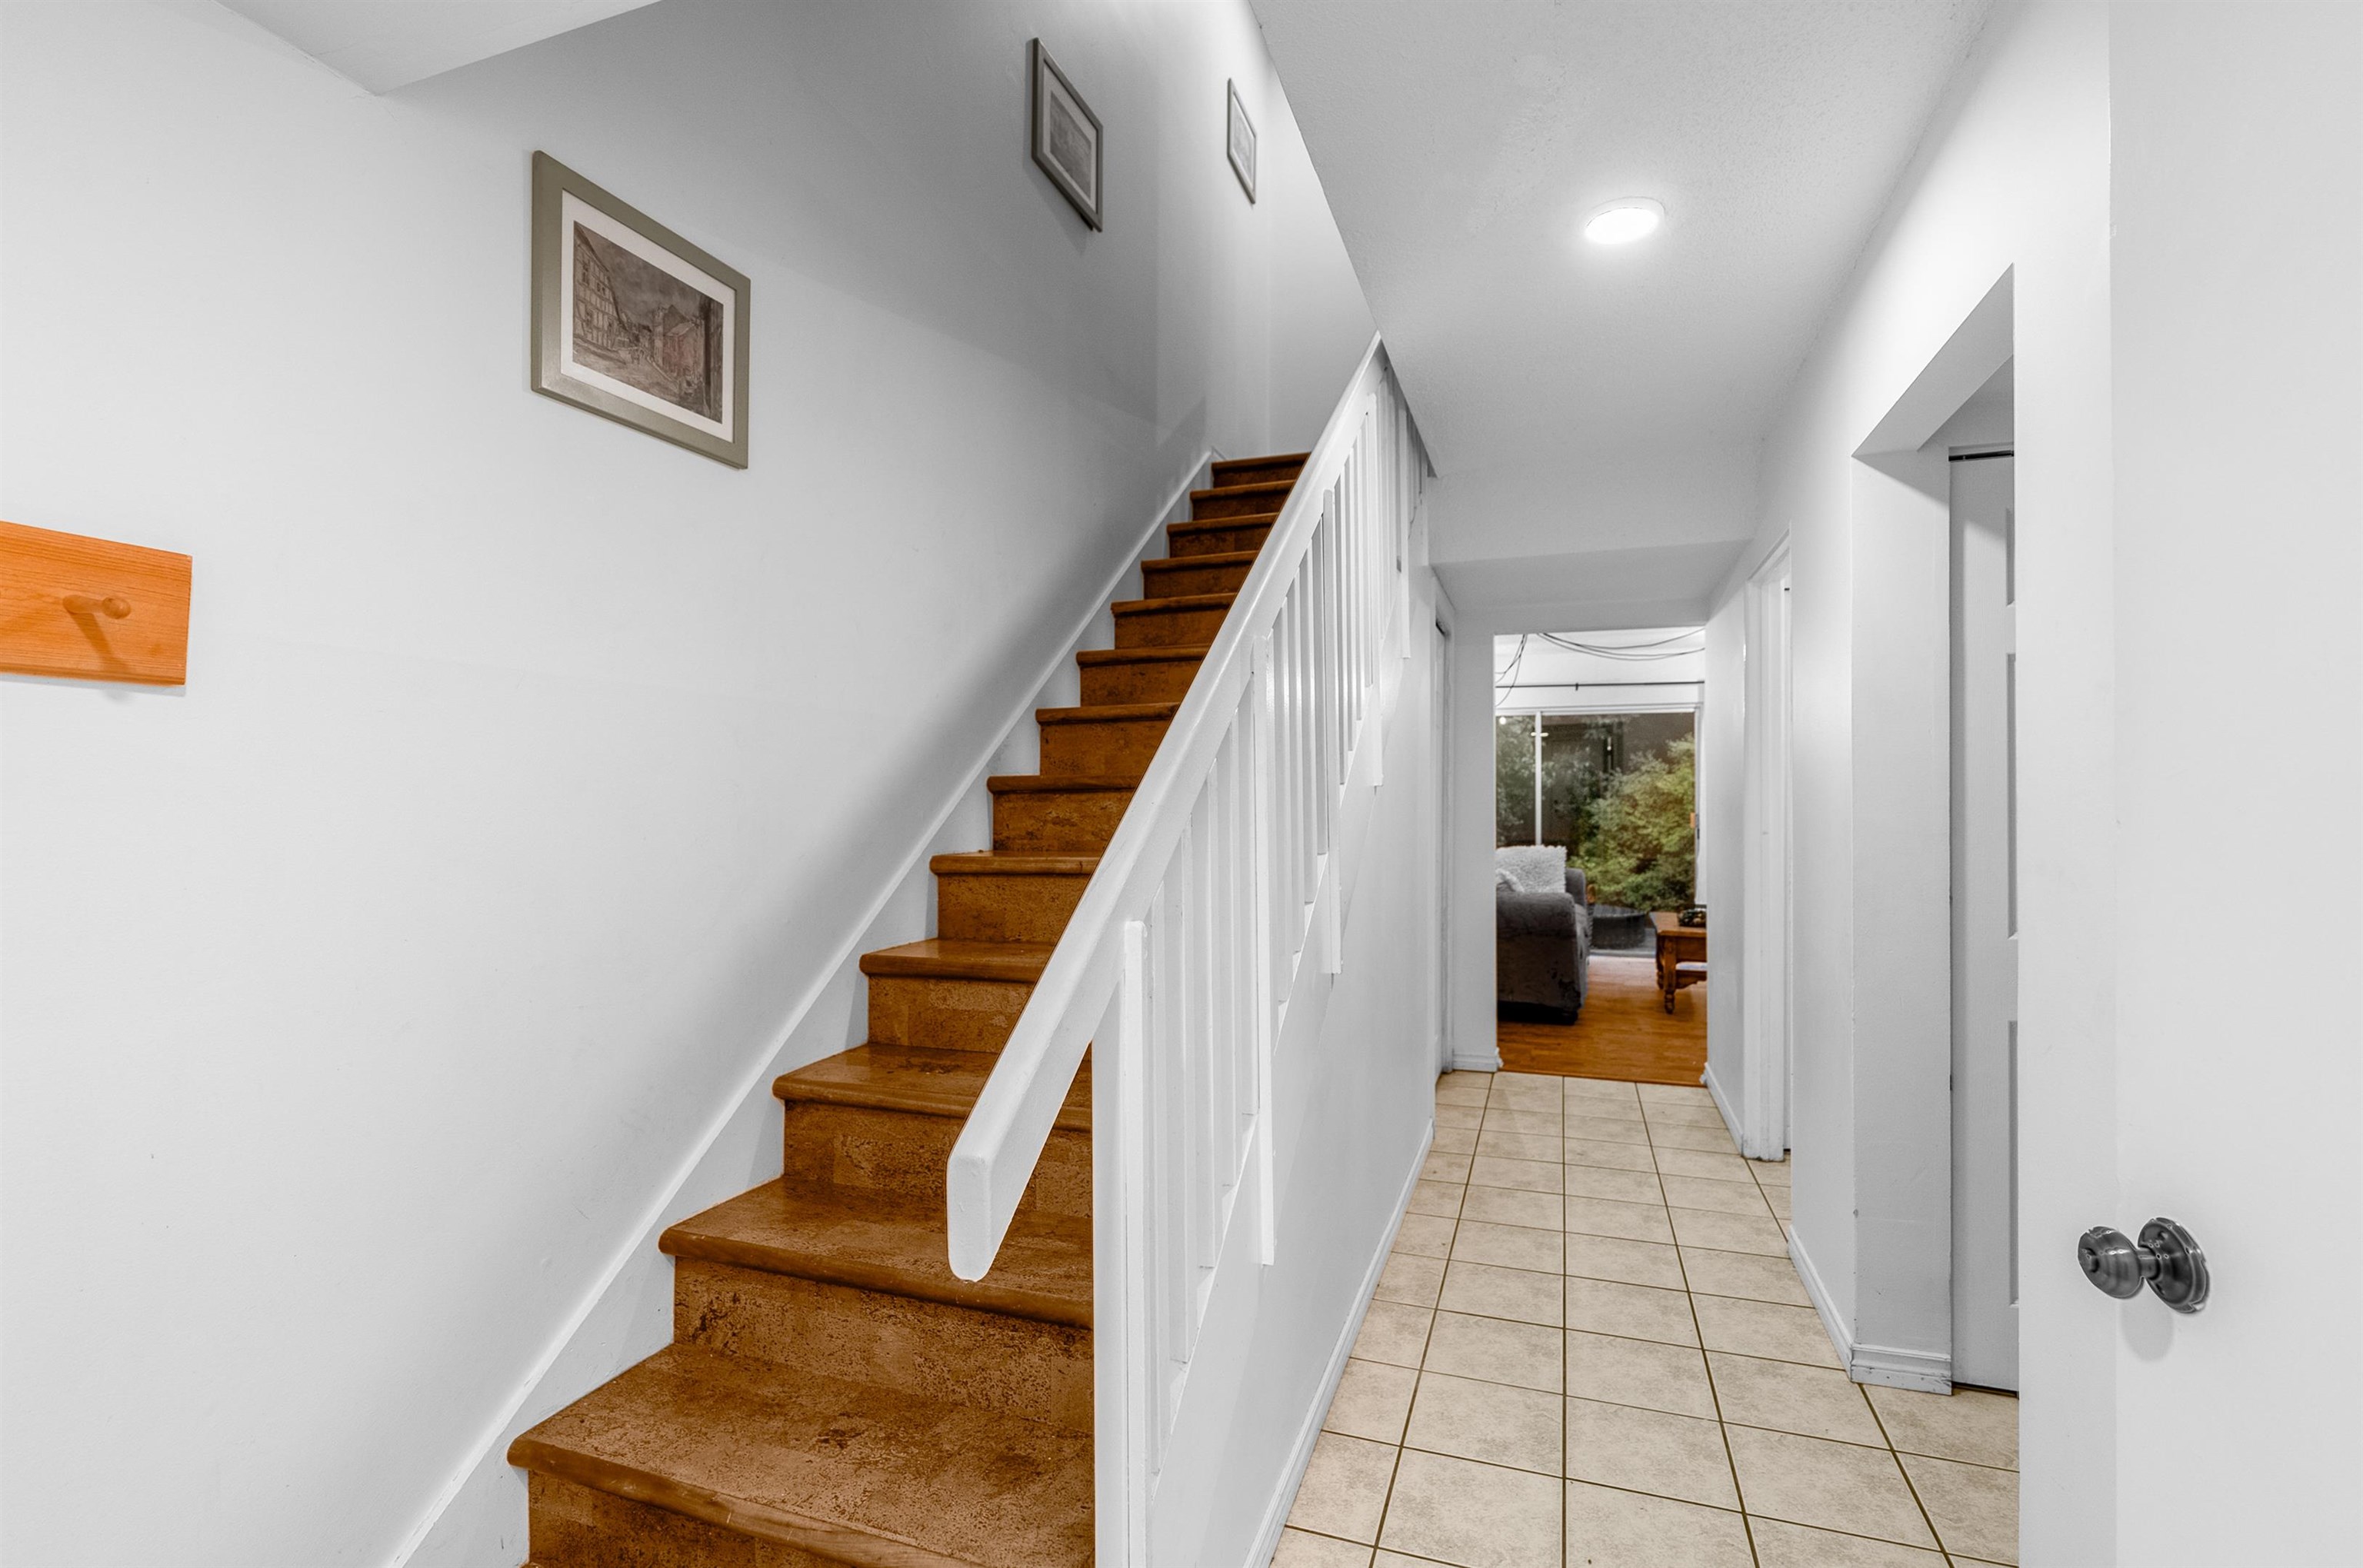 Listing image of 941 WESTVIEW CRESCENT